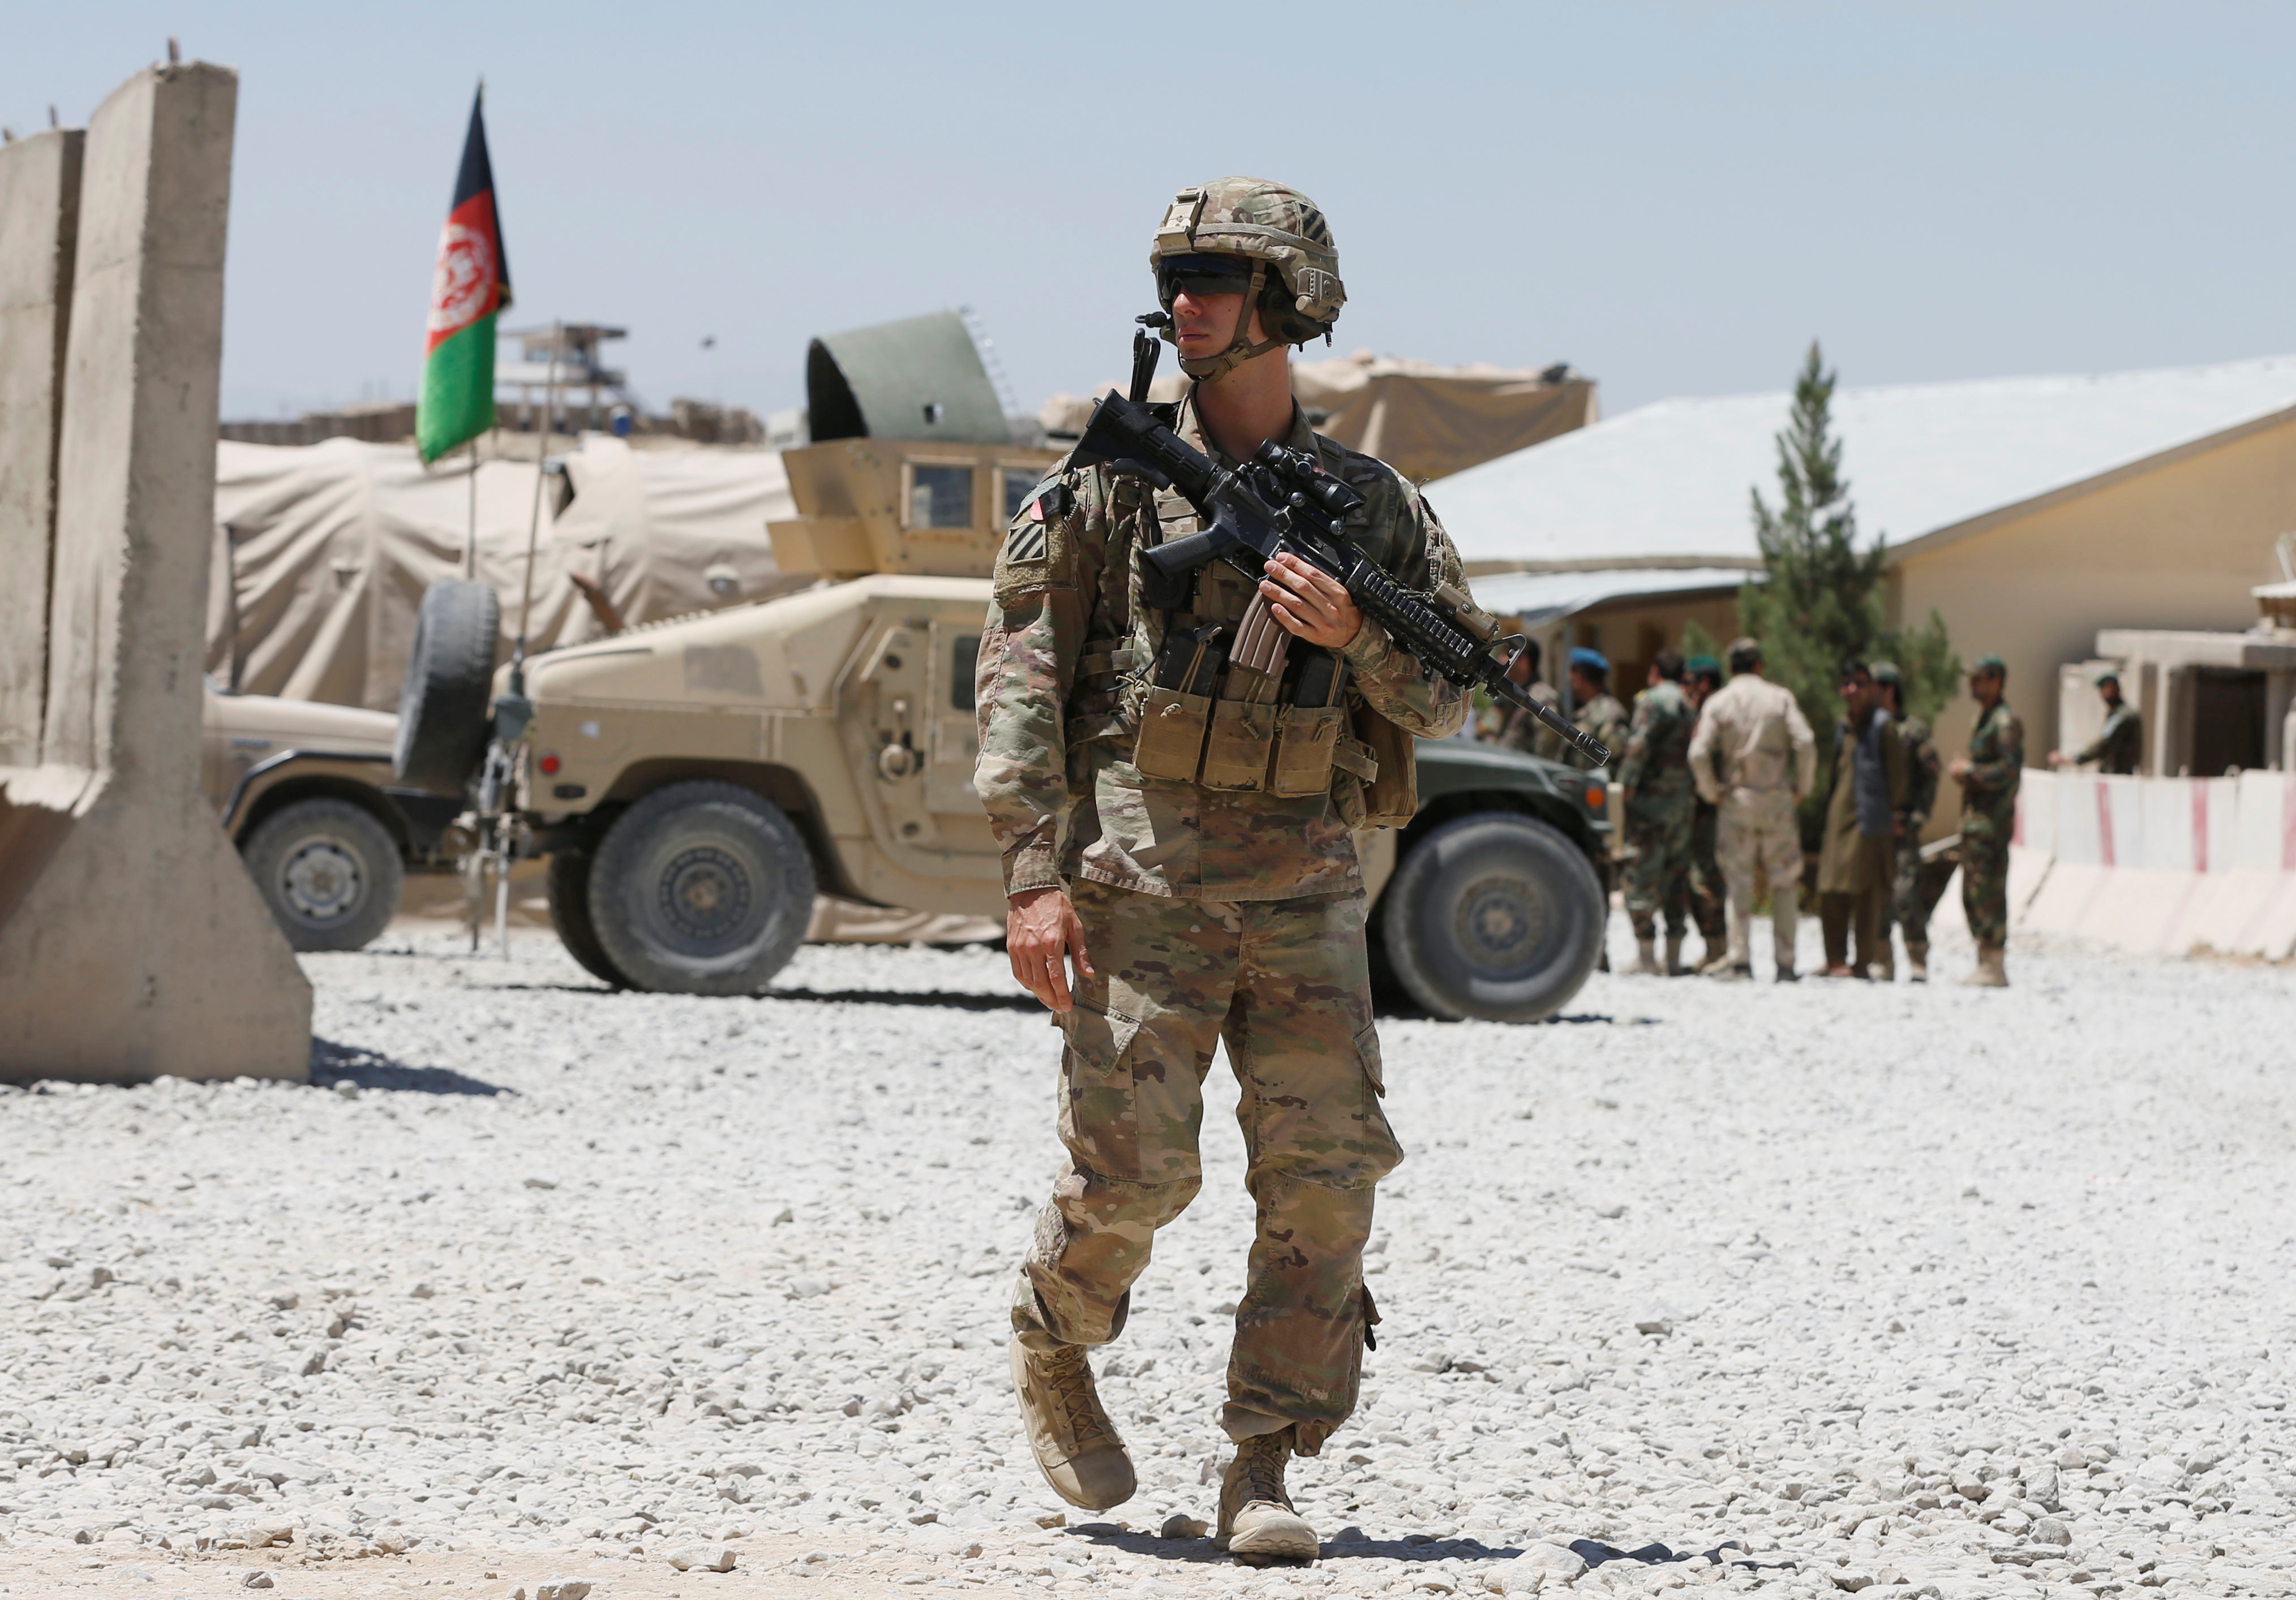 A U.S. soldier keeps watch at an Afghan National Army (ANA) base in Logar province, Afghanistan